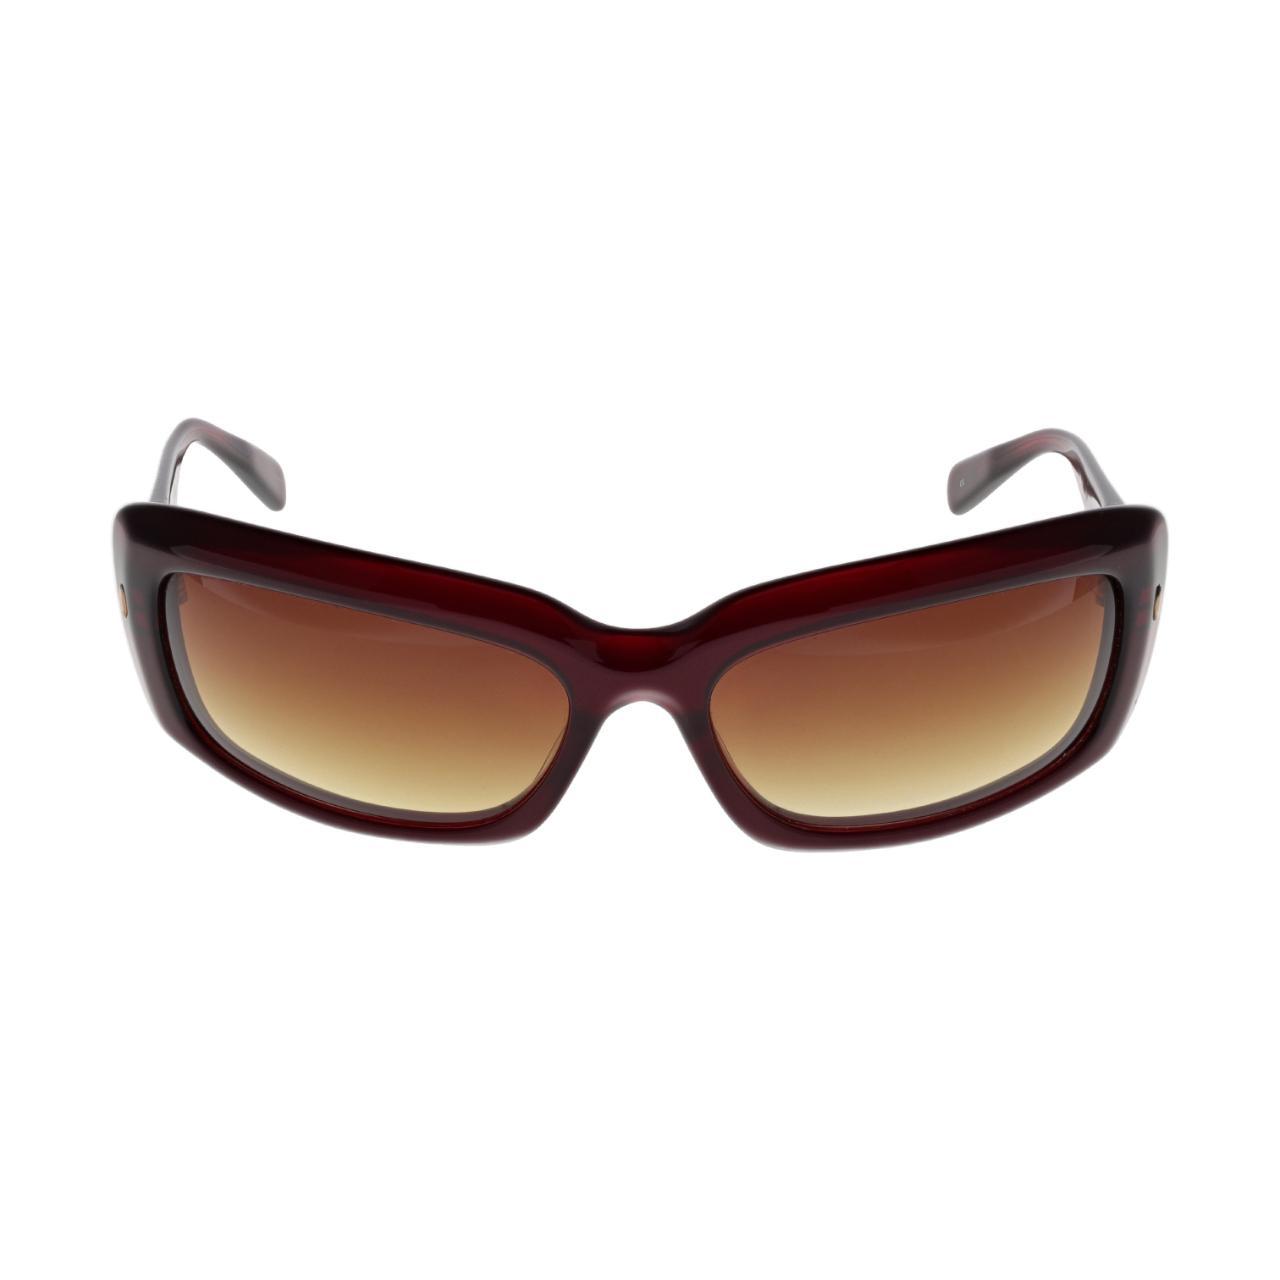 Product Image 2 - OLIVER PEOPLES INGENUE SUNGLASSES

Oliver Peoples